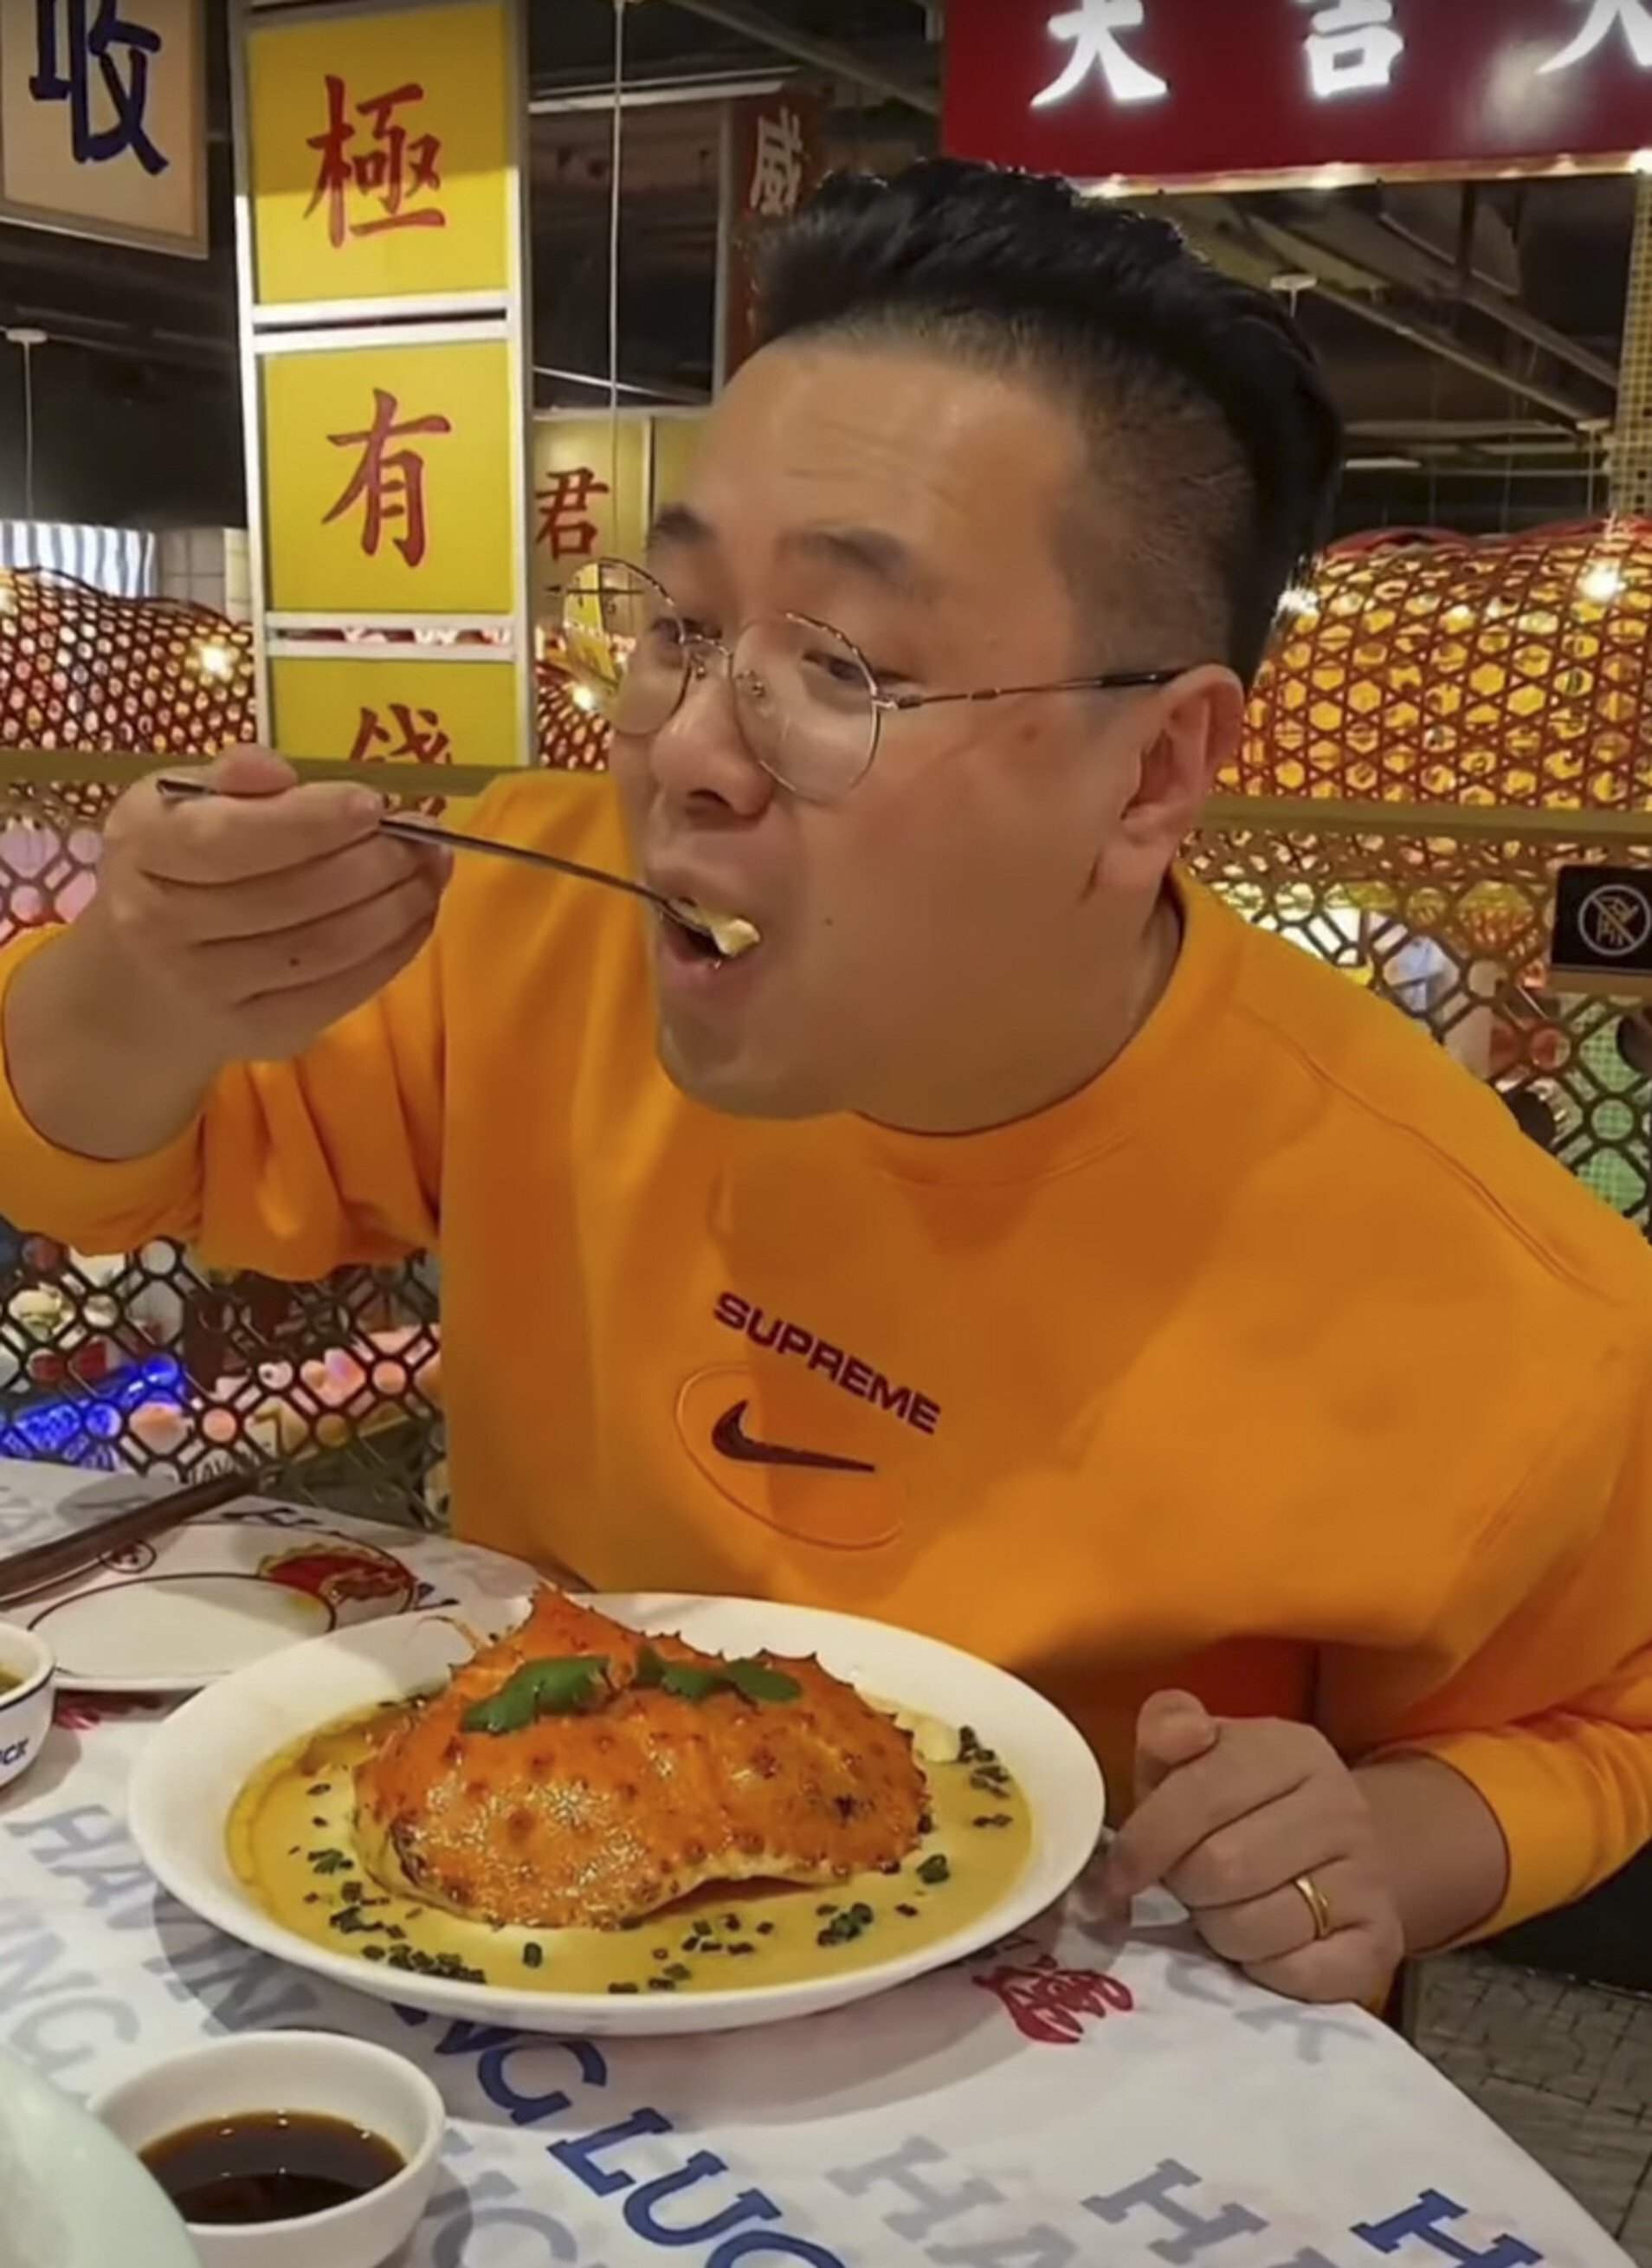 Big Logo, a food influencer famous for seeking out expensive restaurants. Photo: YouTube